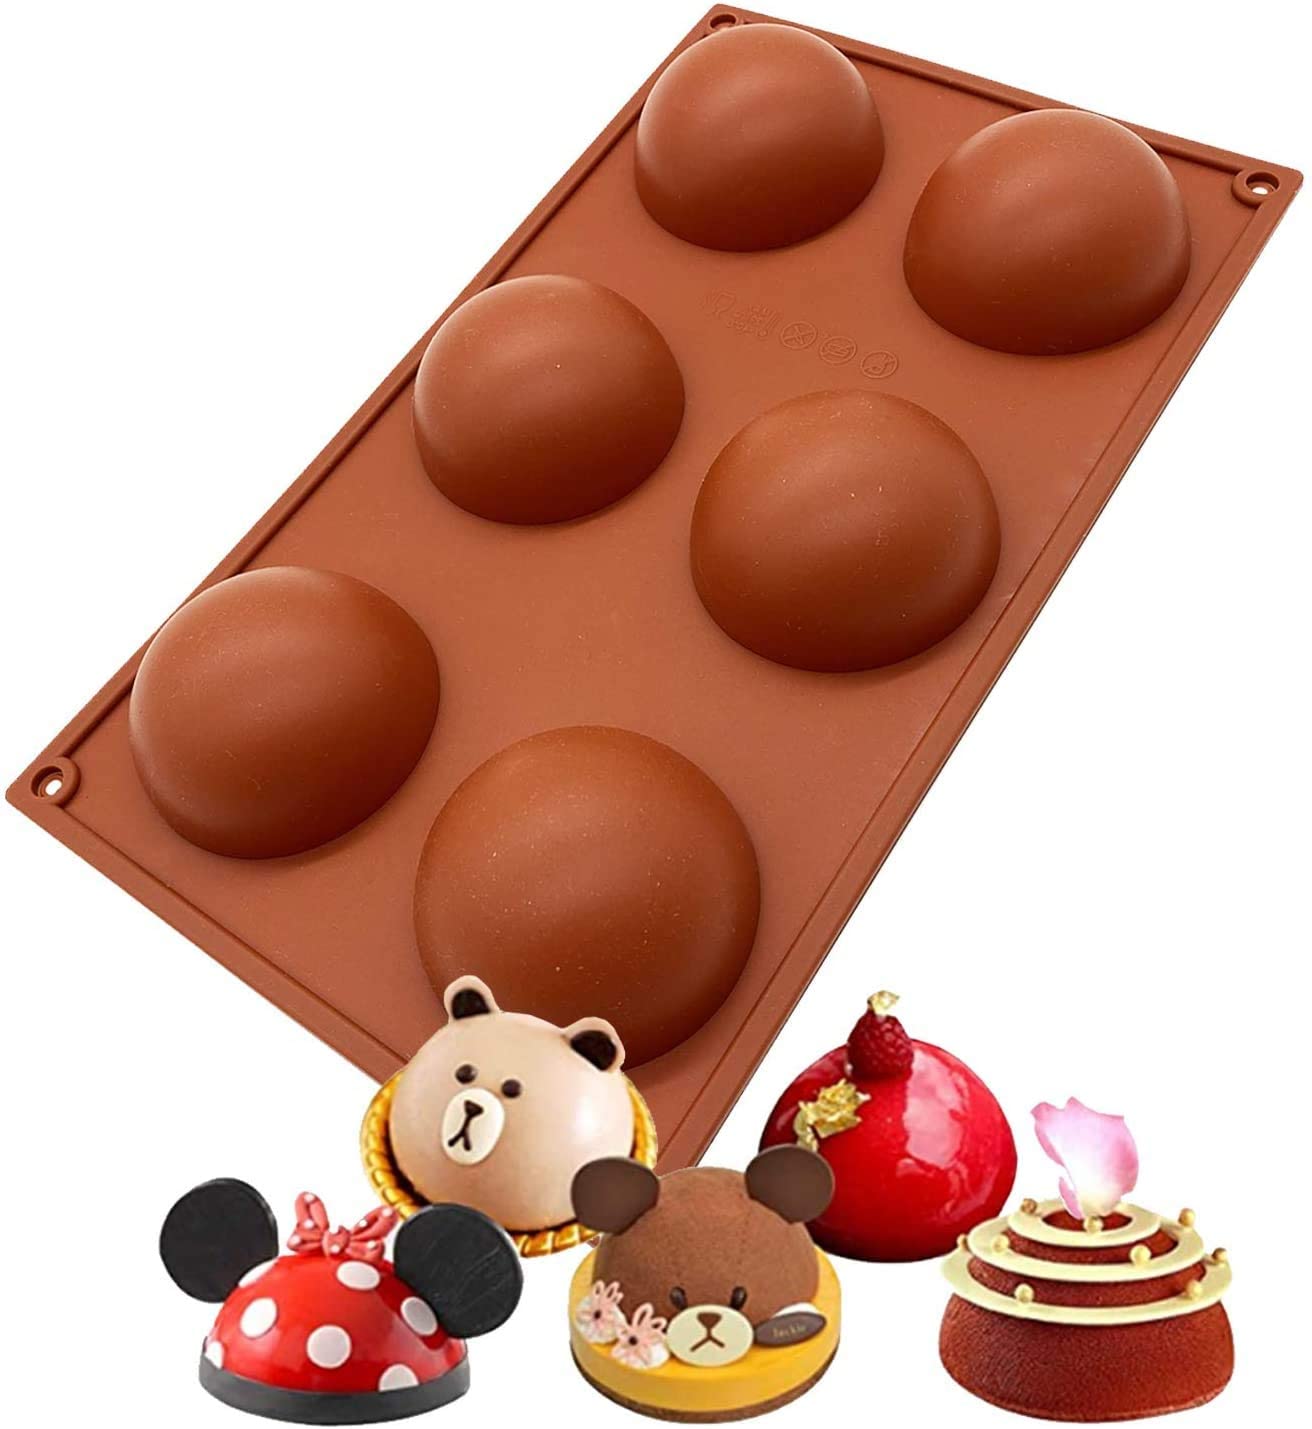 US 3D S/M/L Cake Mould Silicone Soap Pudding Chocolate Fondant Mold 